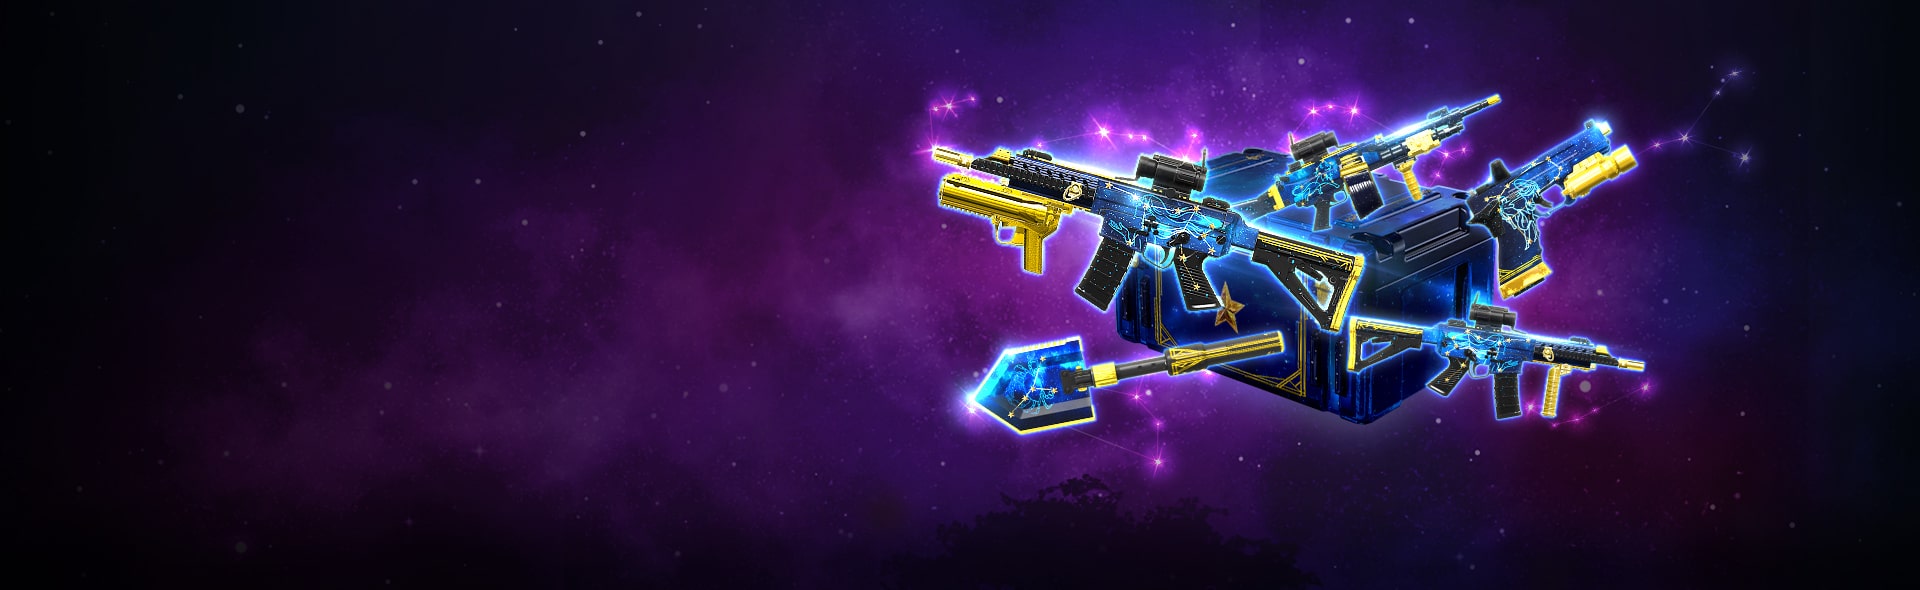 Constellation weapon series<br />Available now!